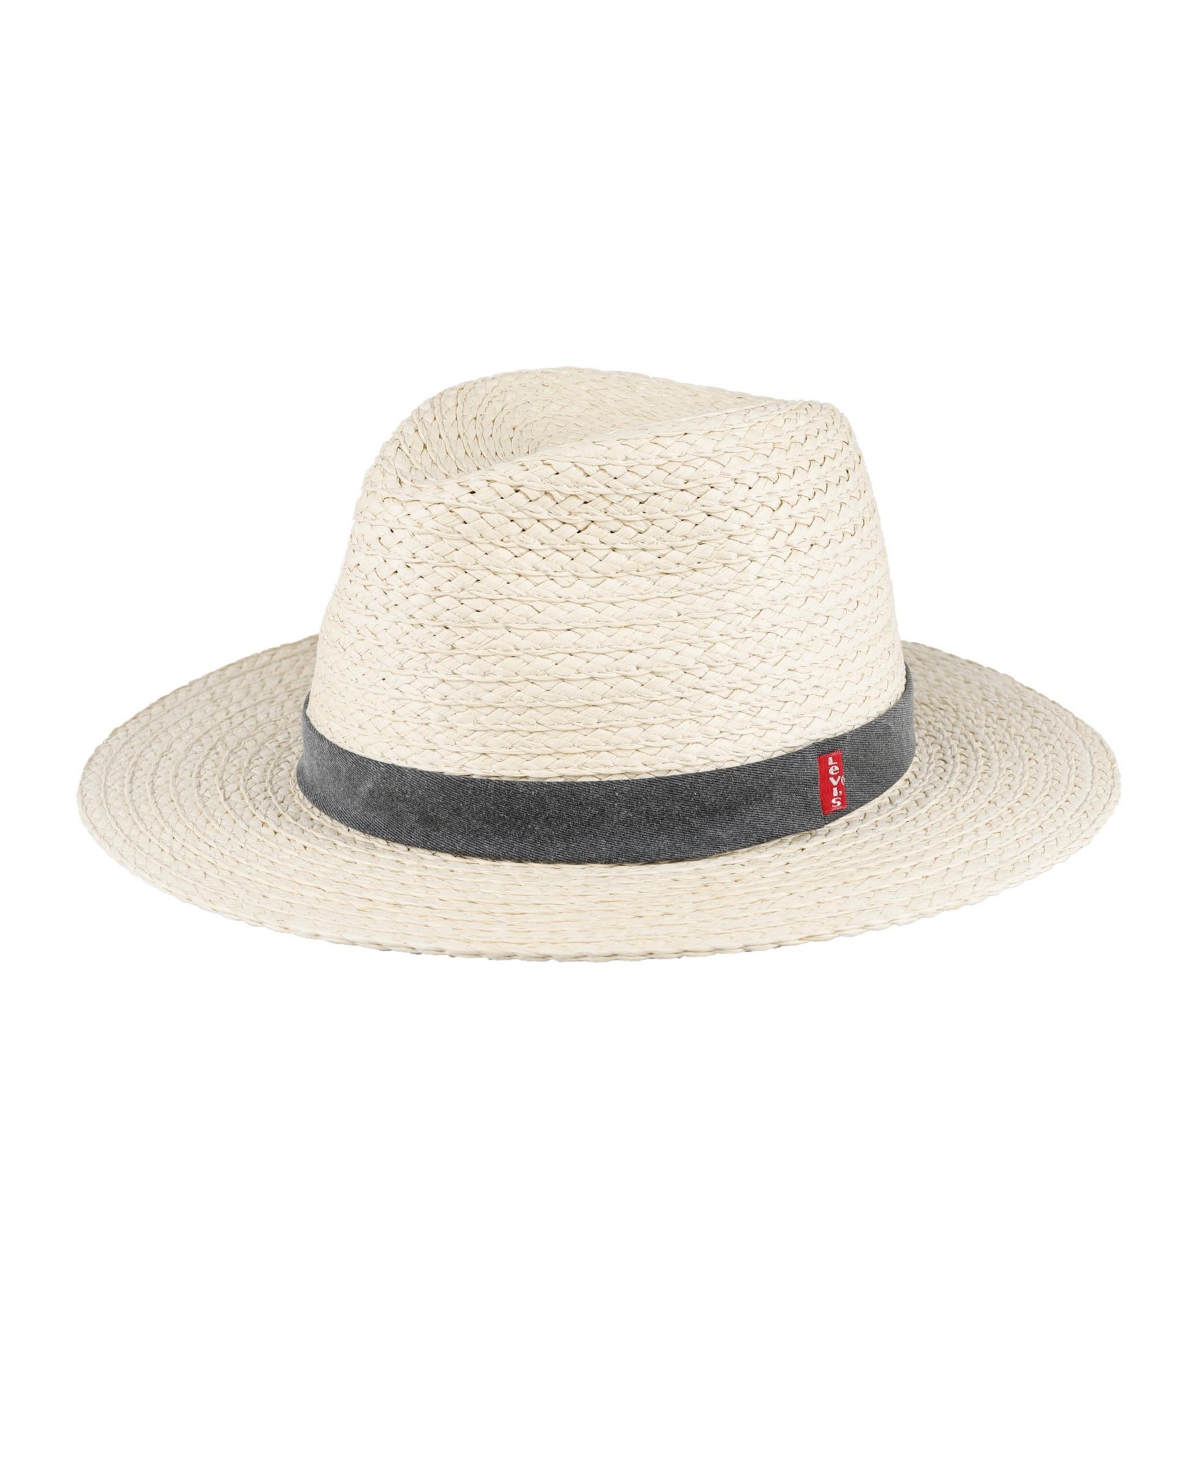 Levi's Men's Straw Panama Hat With Denim Washed Band In Natural,black